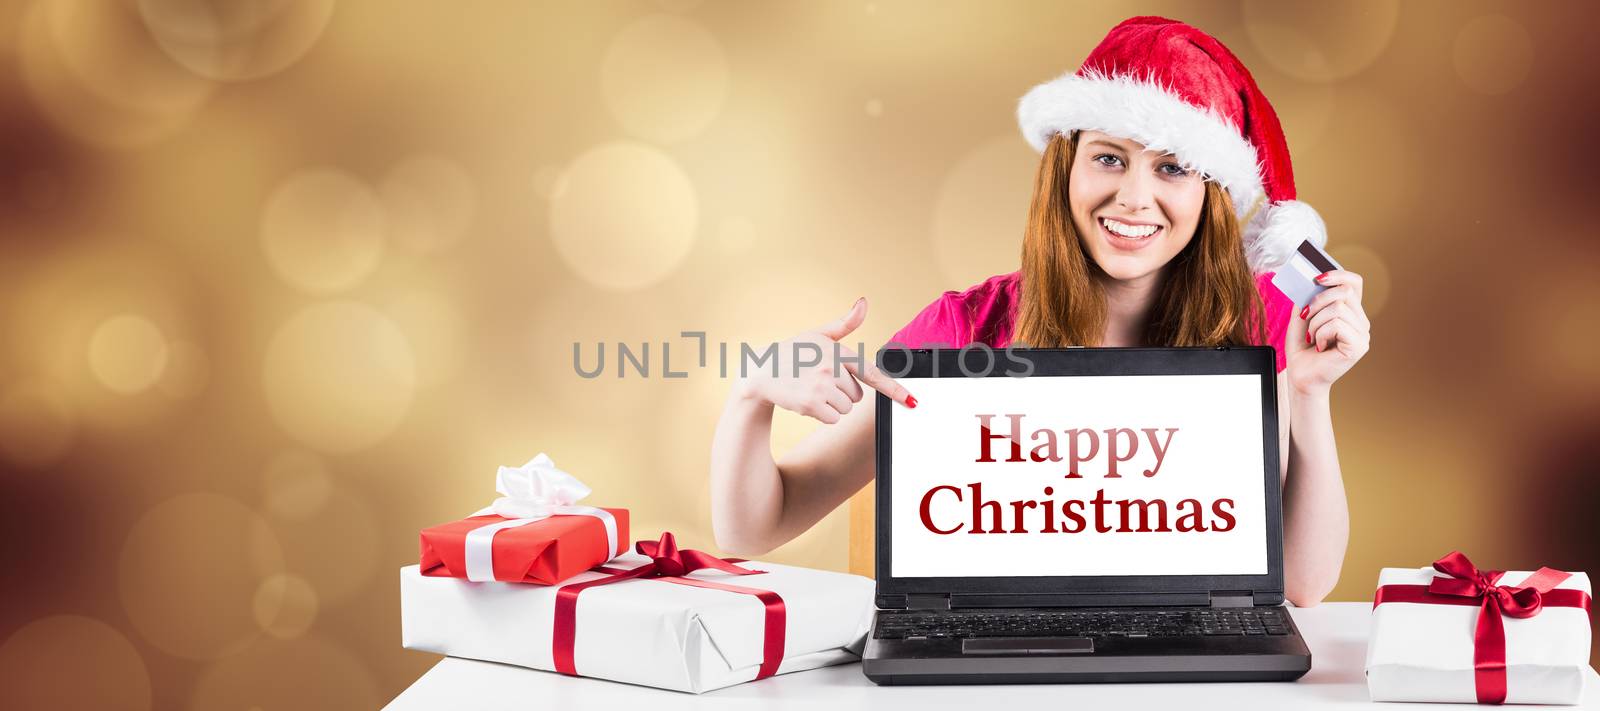 Composite image of festive redhead shopping online with laptop by Wavebreakmedia